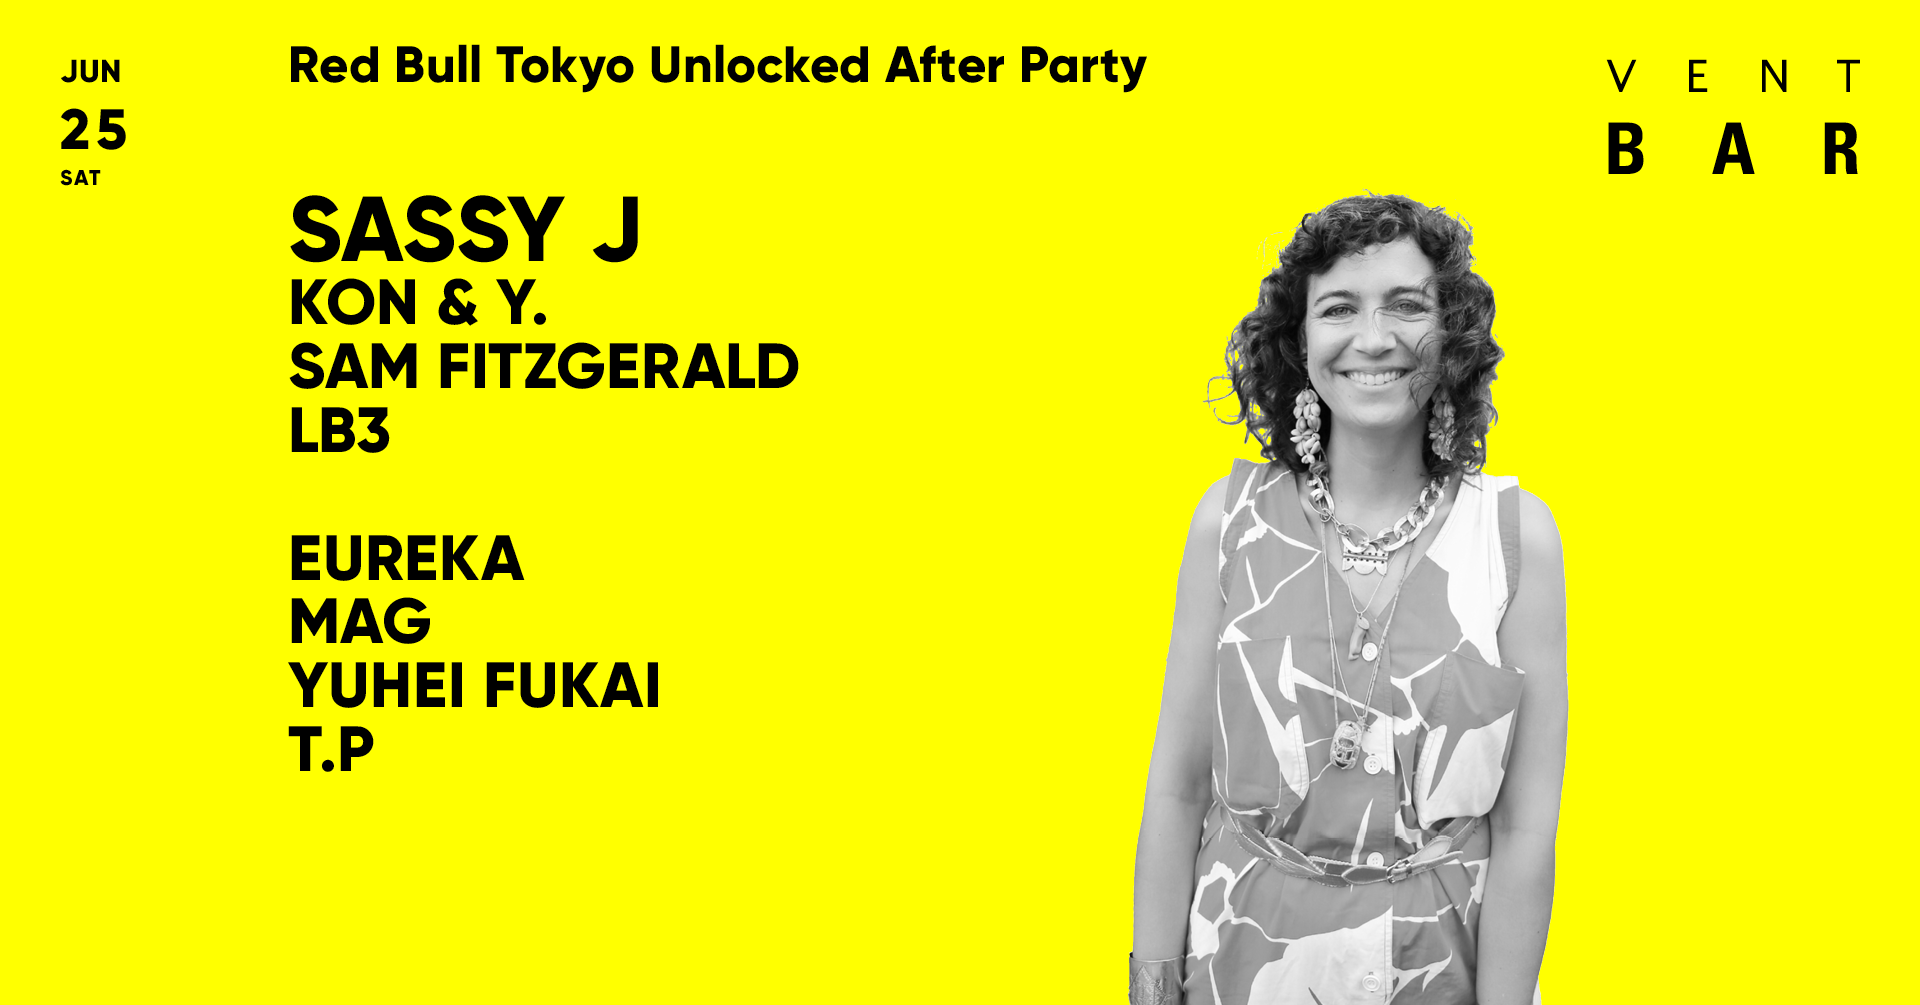 Sassy J / Red Bull Tokyo Unlocked After Party